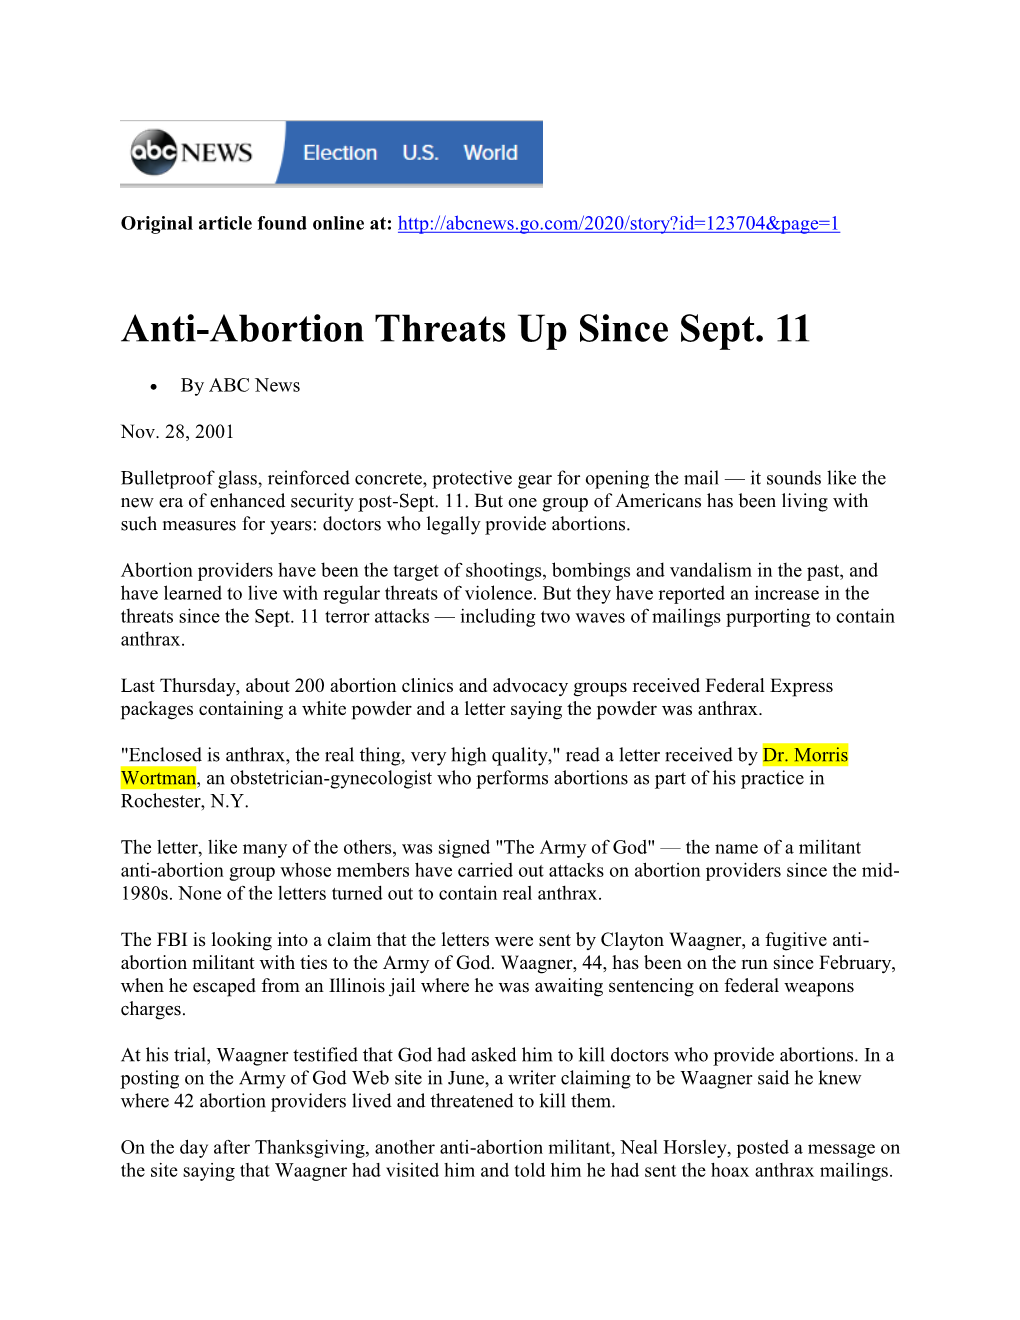 Anti-Abortion Threats up Since Sept. 11